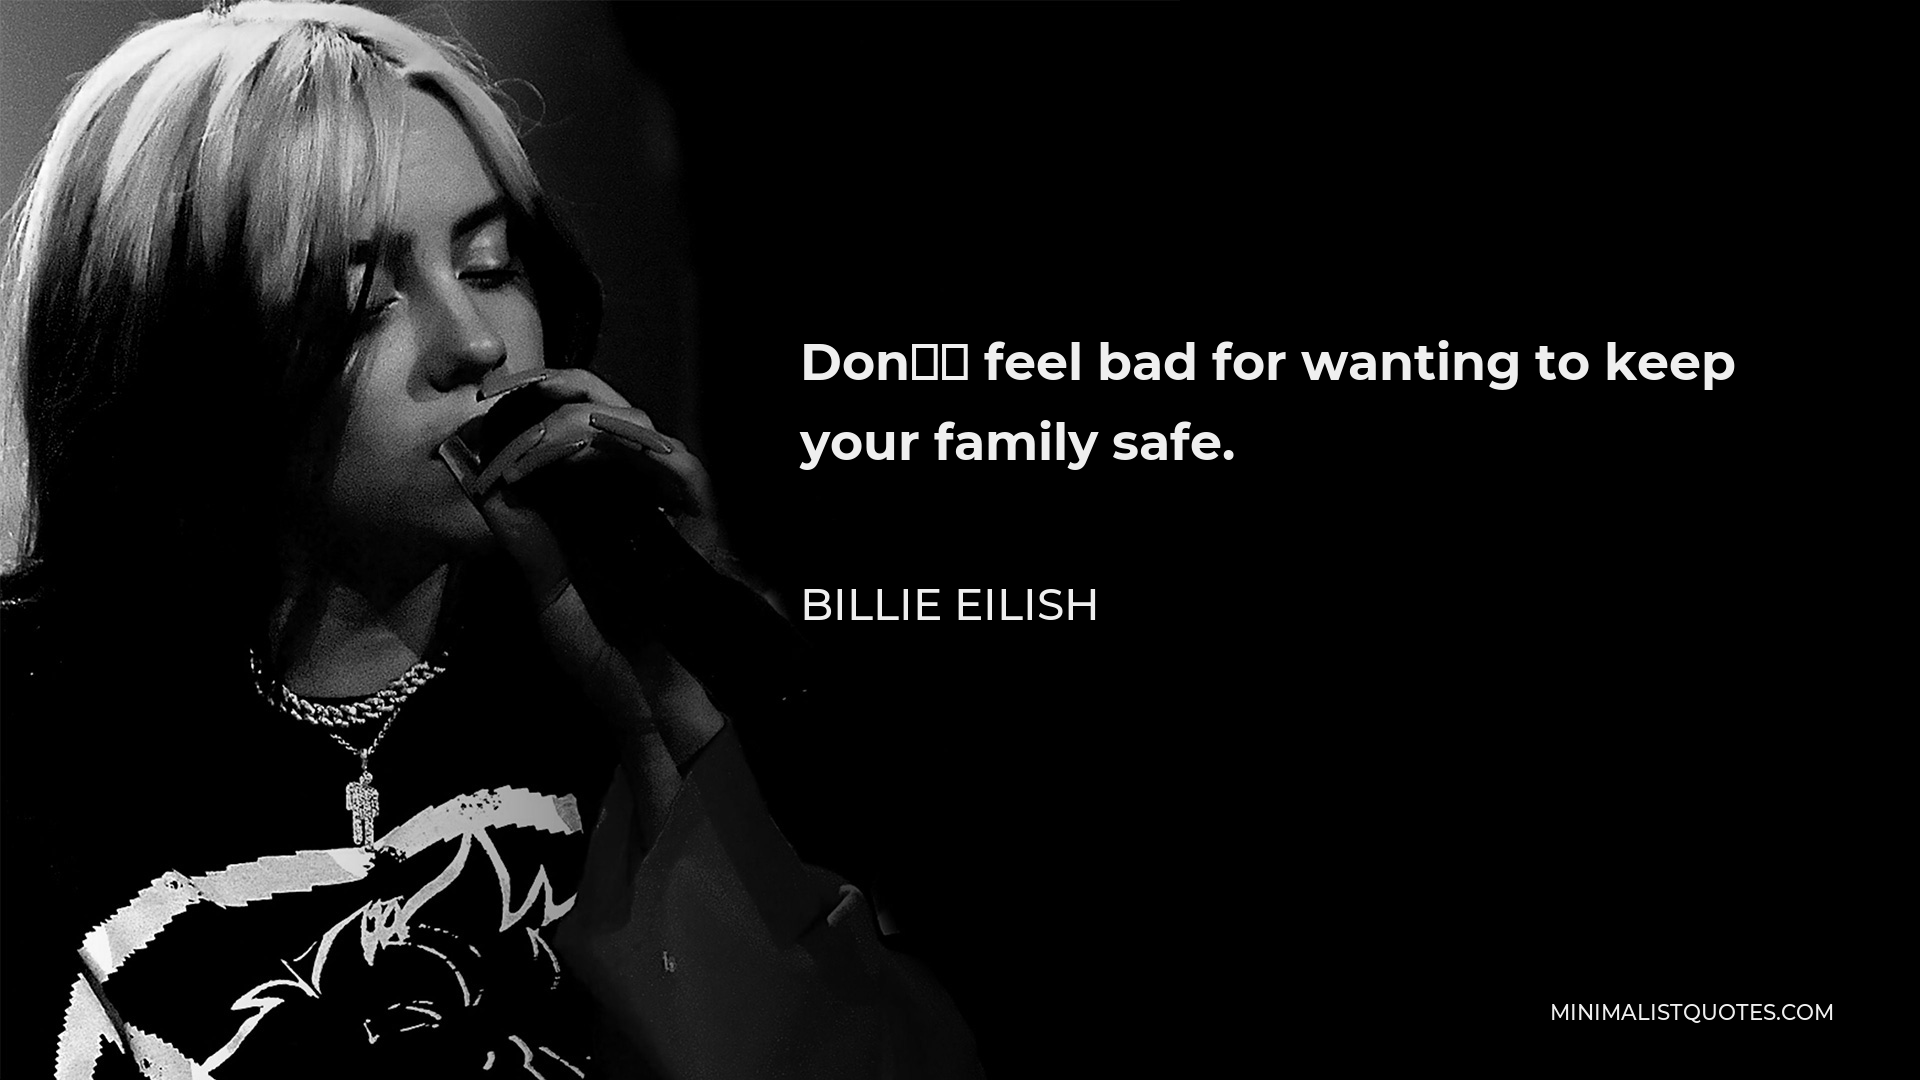 Billie Eilish Quote - Don’t feel bad for wanting to keep your family safe.